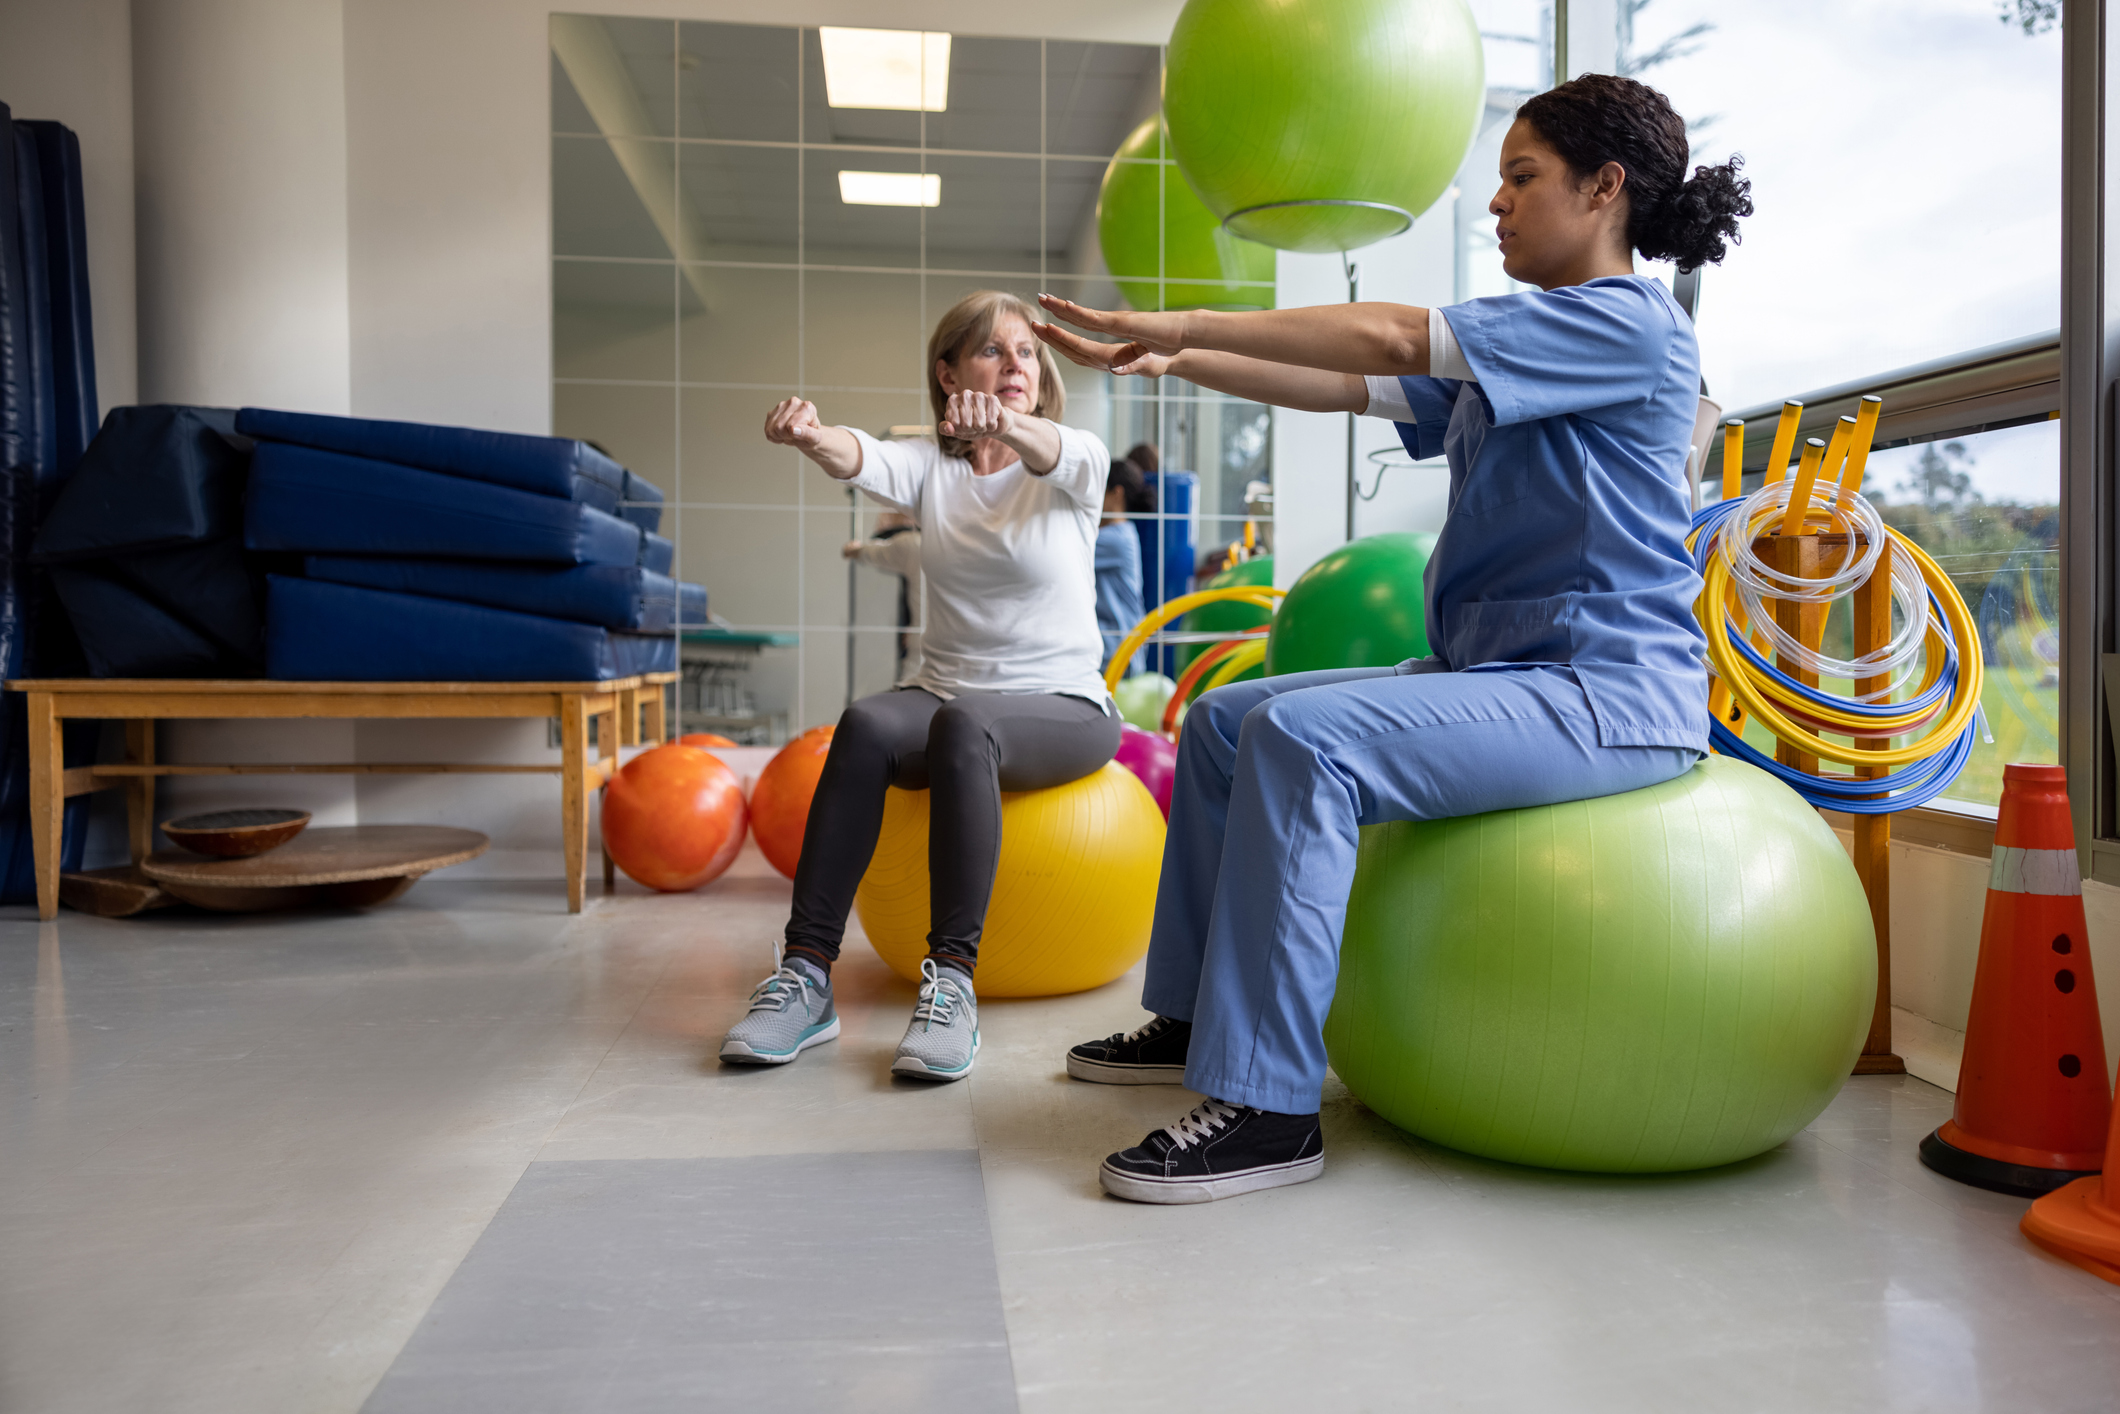 travel-pt-working-with-patient-balance-on-inflatable-exercise-balls